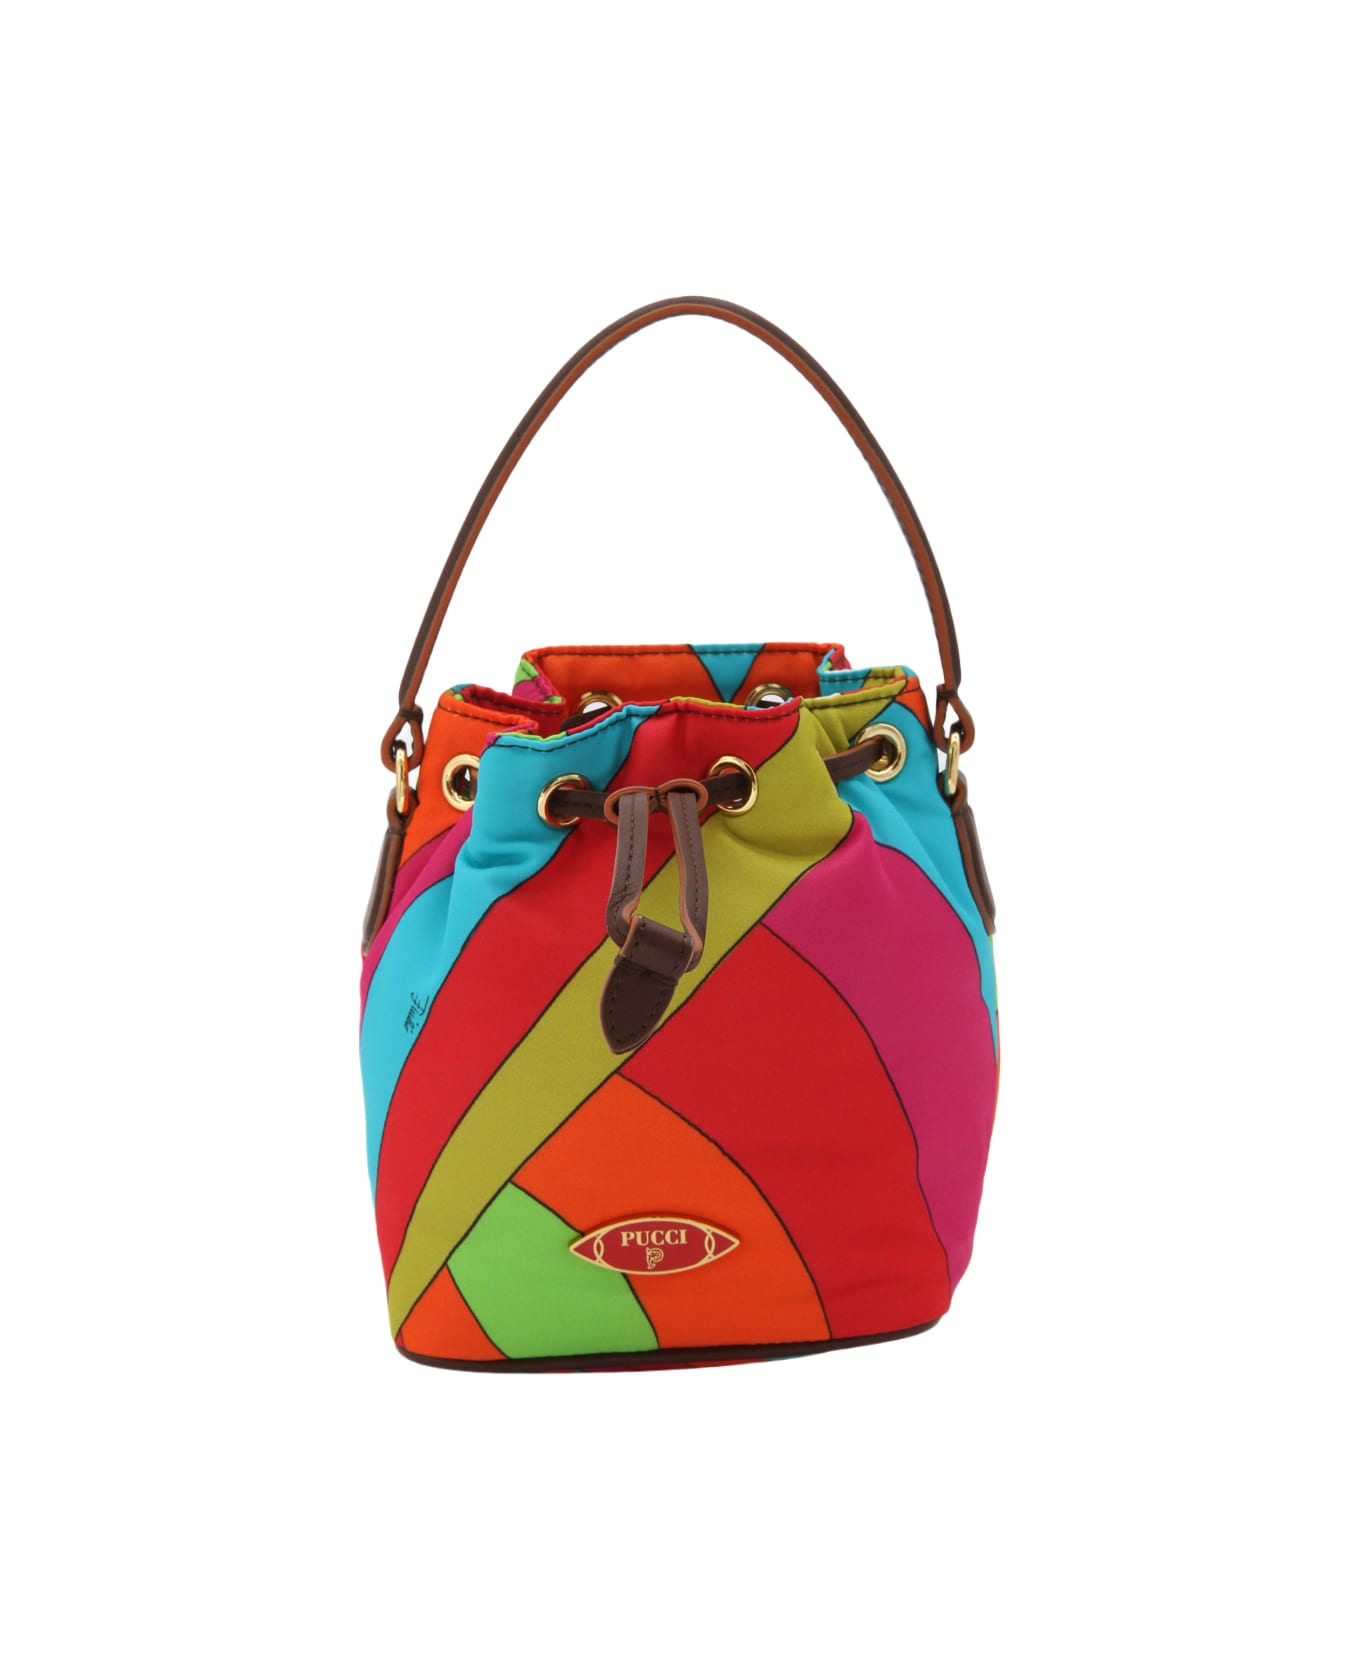 Pucci Multicolor Yummy Bucket Bag - BLUE/YELLOW クラッチバッグ